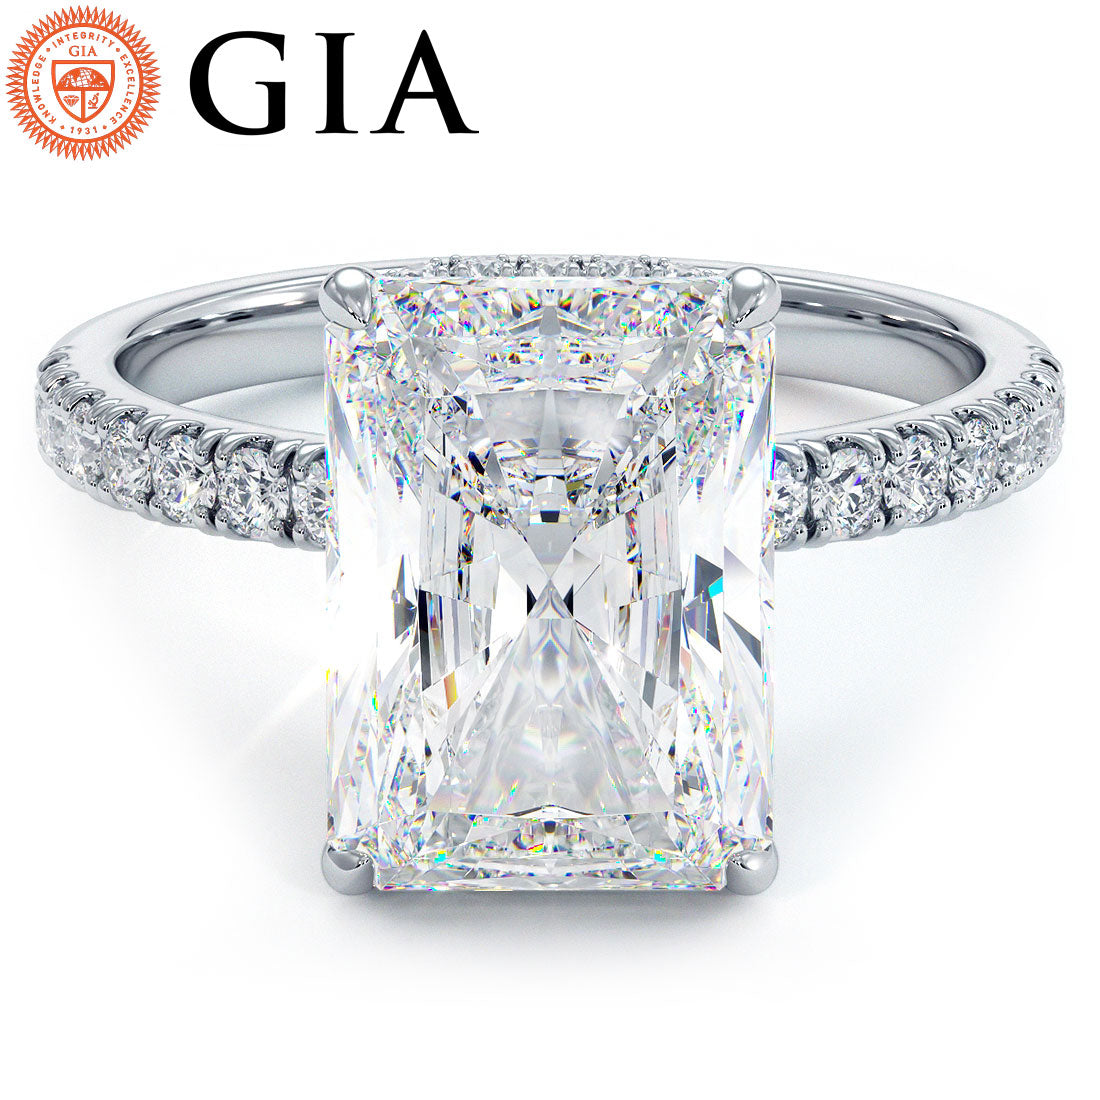 4.61ctw GIA Certified F-VS2 Radiant Cut Under Halo Petite Micropavé Lab Grown Diamond Engagement Ring set in 14k White Gold